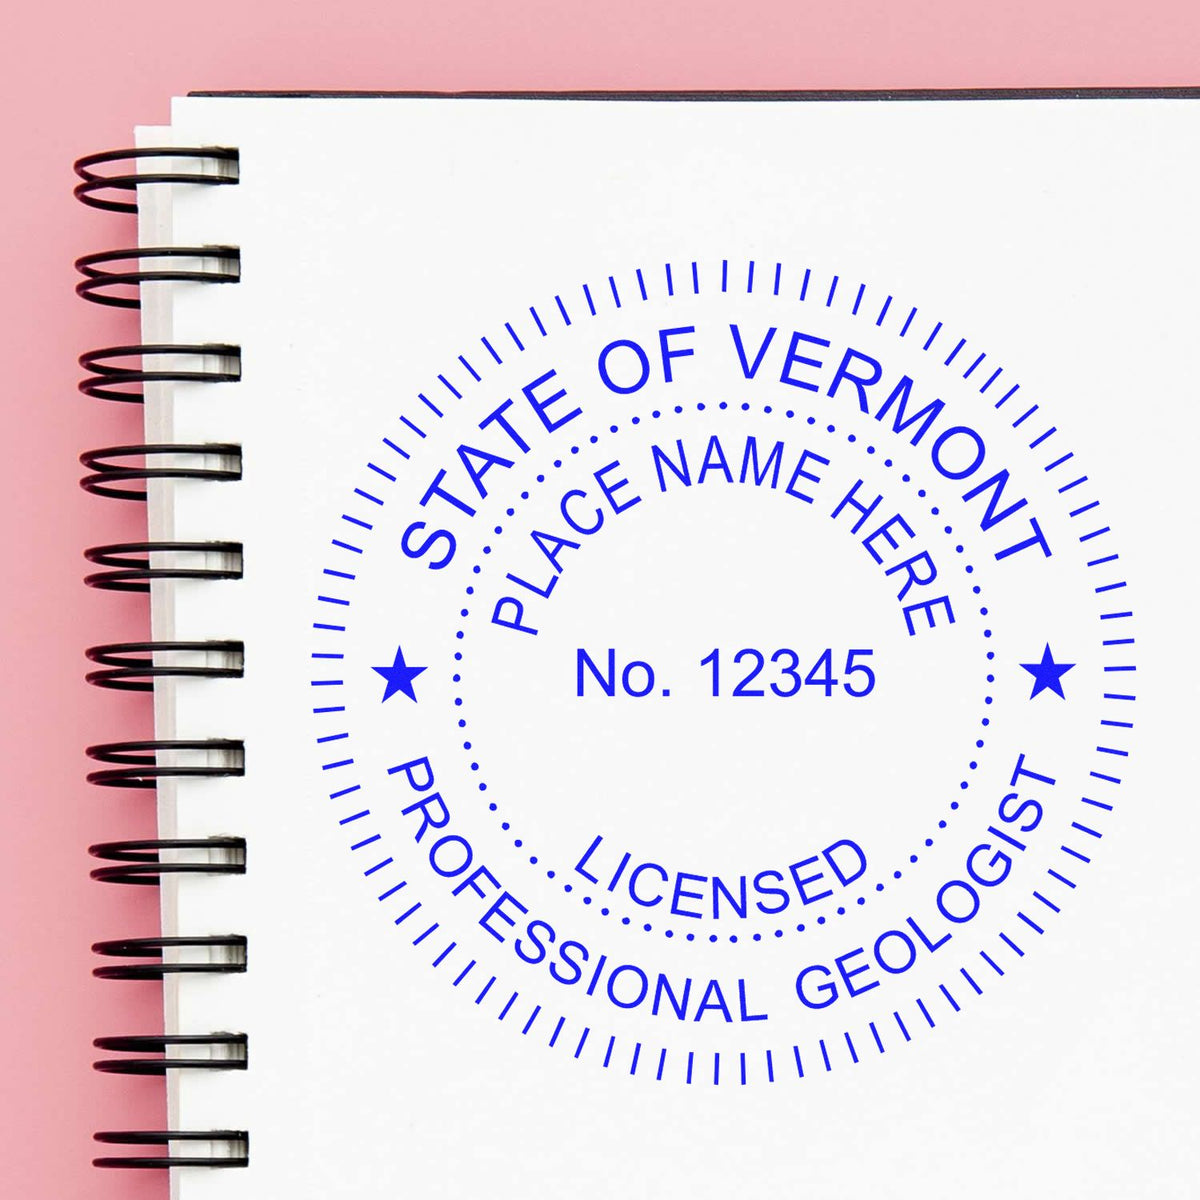 An alternative view of the Digital Vermont Geologist Stamp, Electronic Seal for Vermont Geologist stamped on a sheet of paper showing the image in use